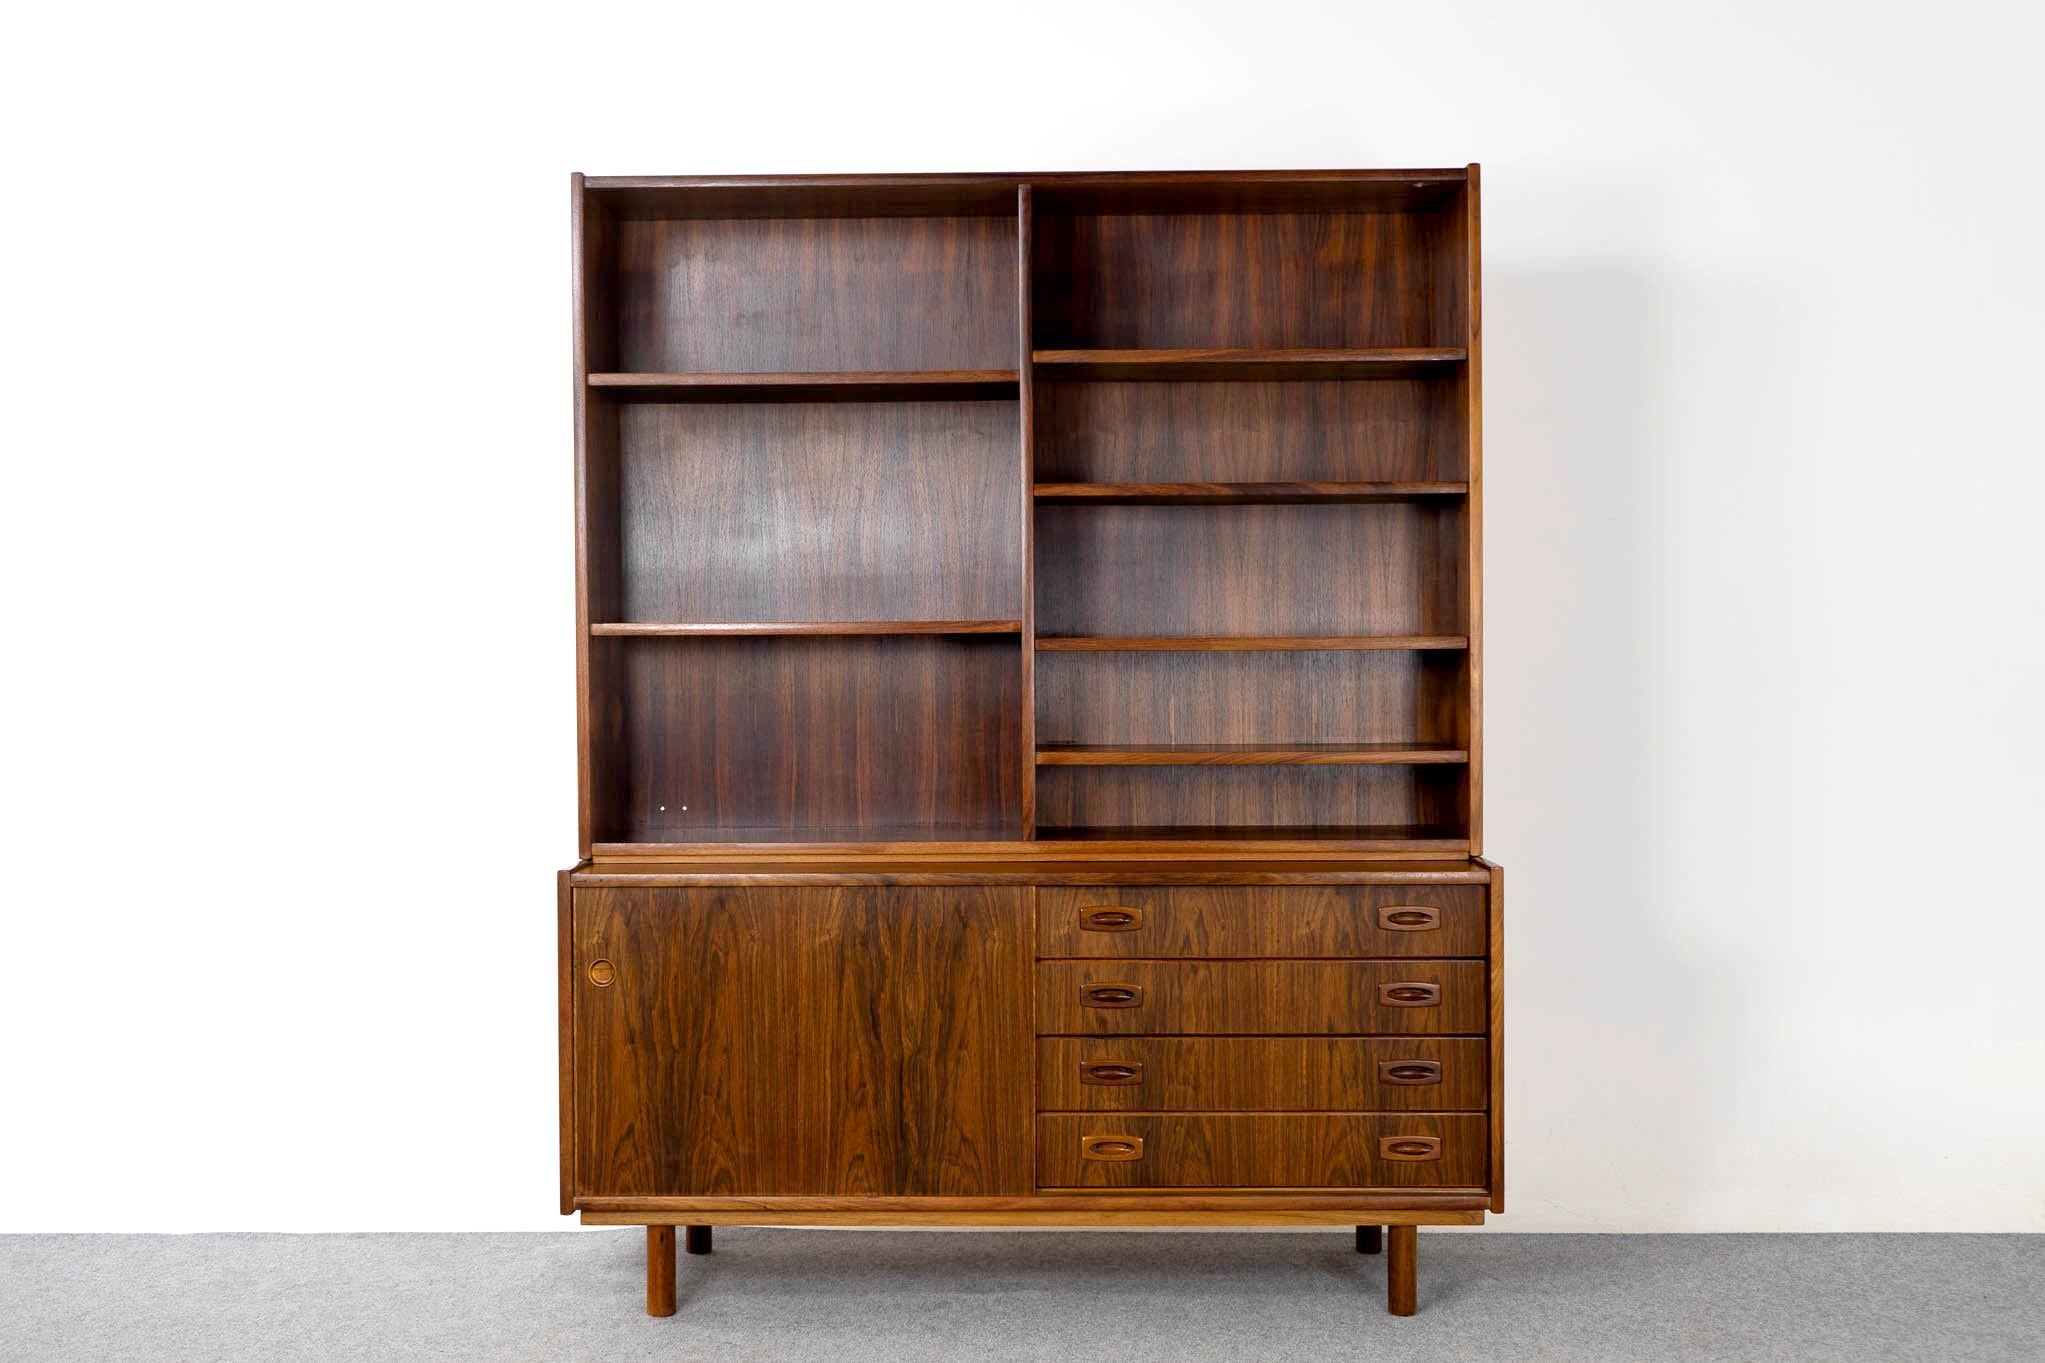 Rosewood Danish modern bookcase/cabinet, circa 1960's. Open bookcase with adjustable shelving, exterior drawers and a sliding door with an interior shelf. Bookcase rests upon lower cabinet, can be used separately.

Unrestored item, some marks